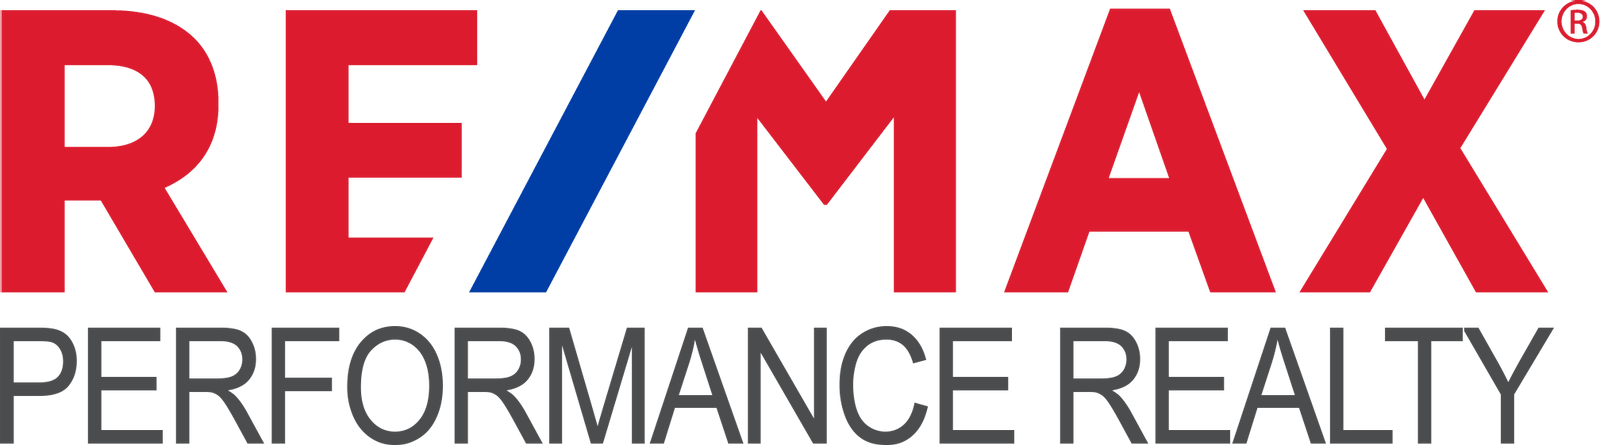 RE/MAX Performance Realty Logo 